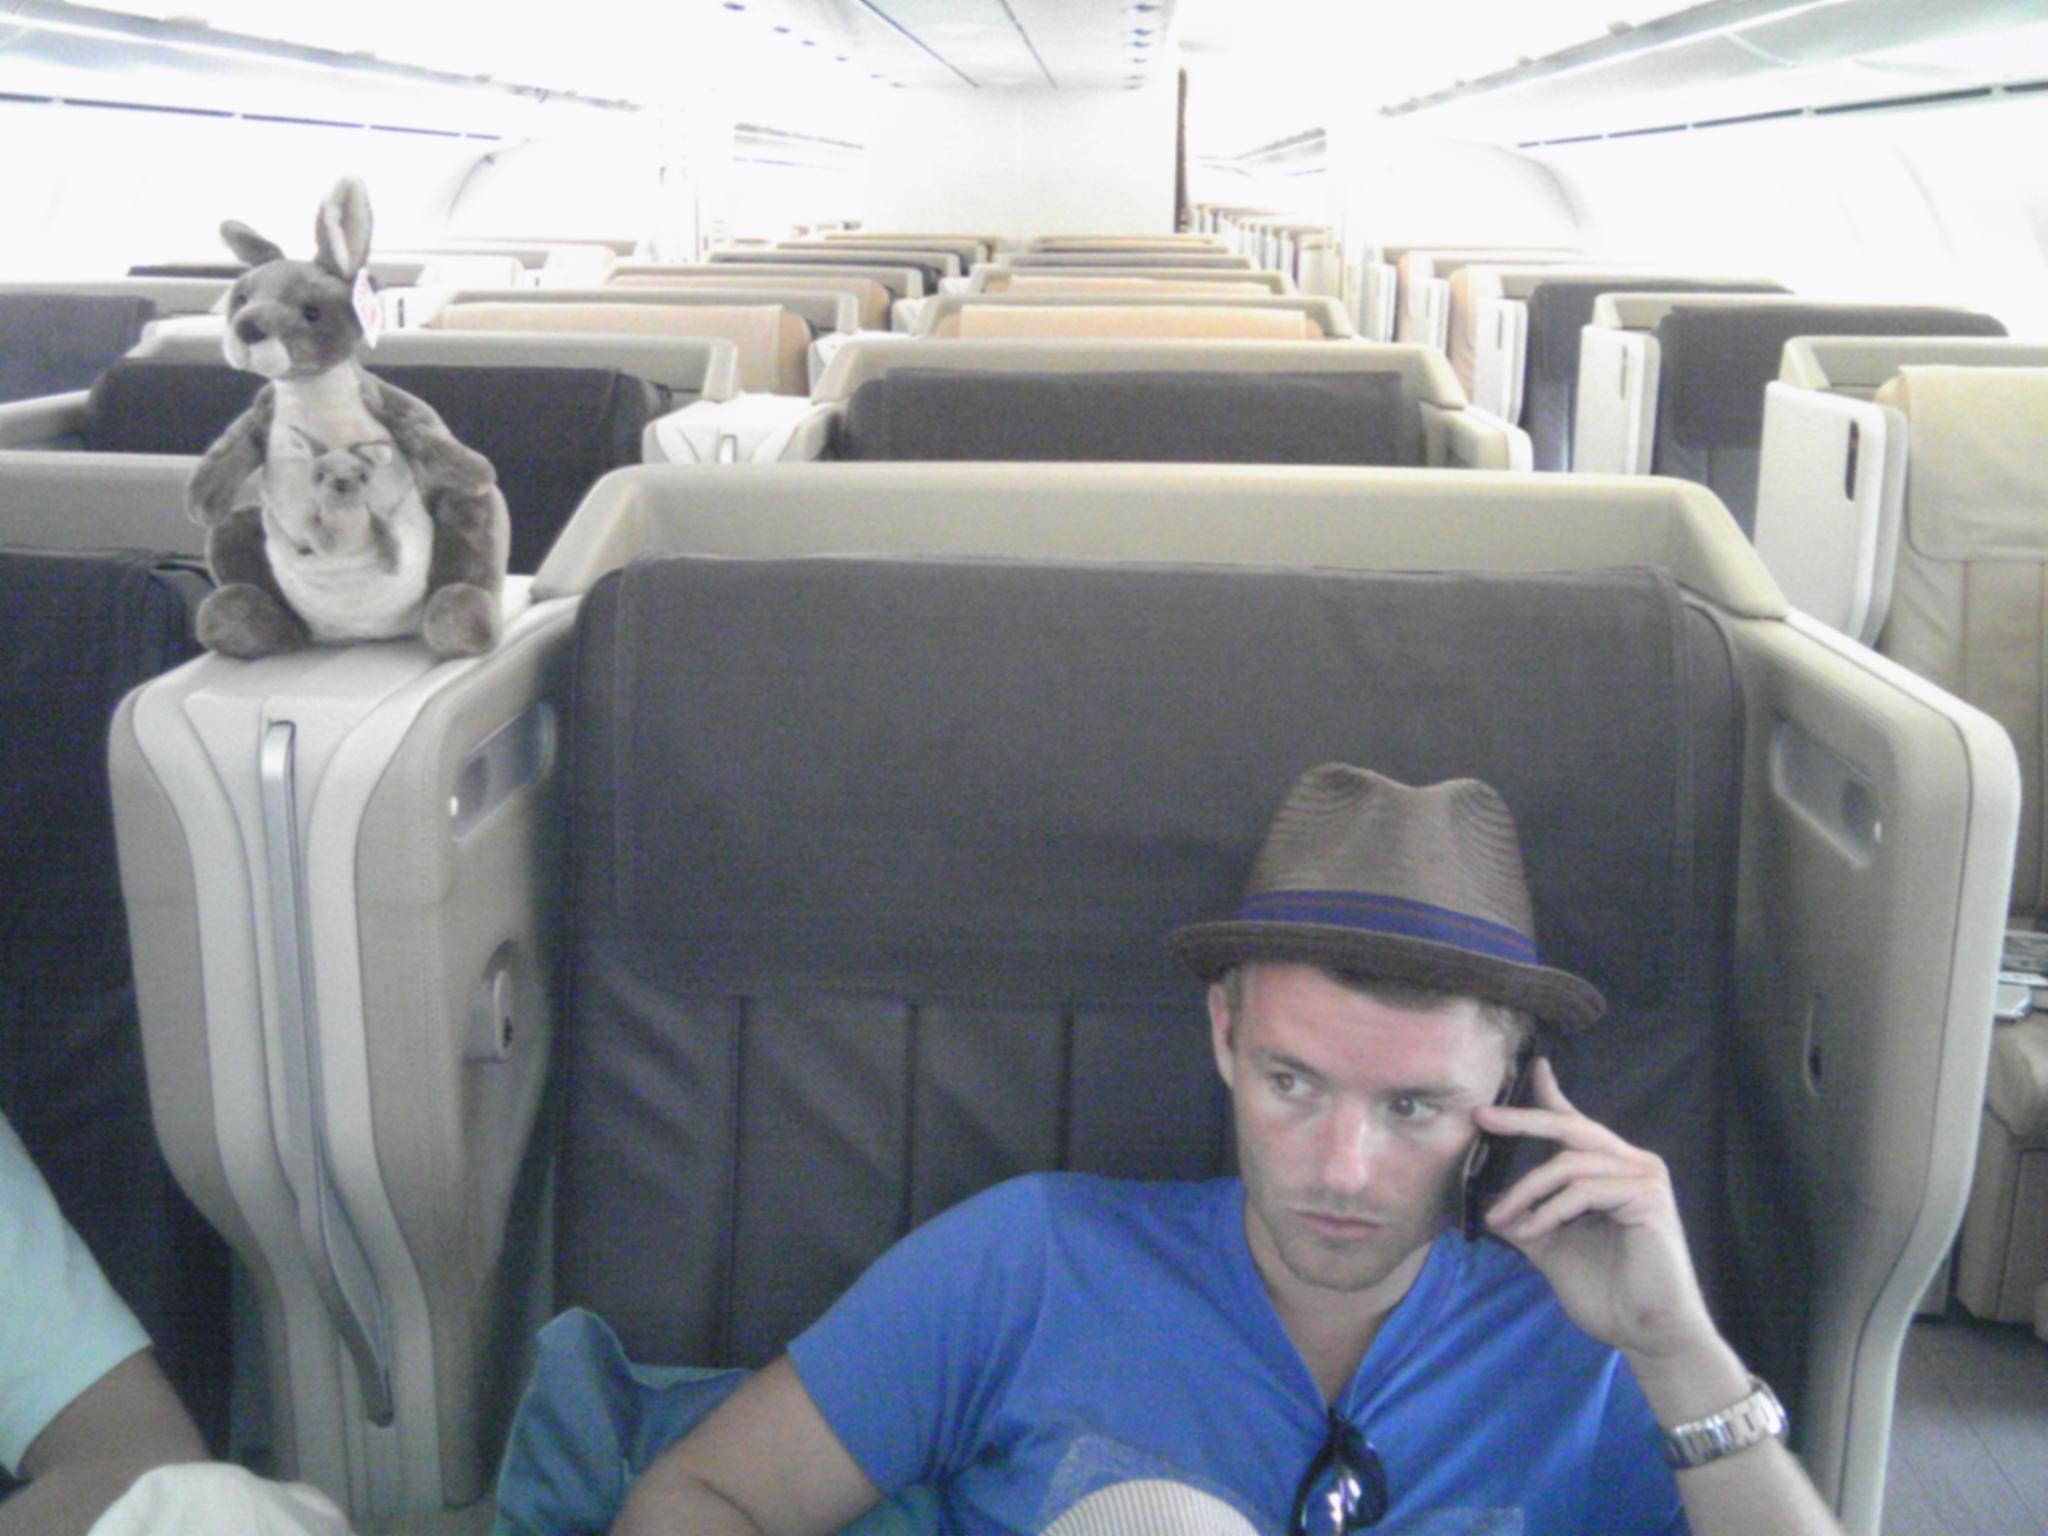 Chris Masterson on Plane Back From Singapore With Chinese Kangaroo